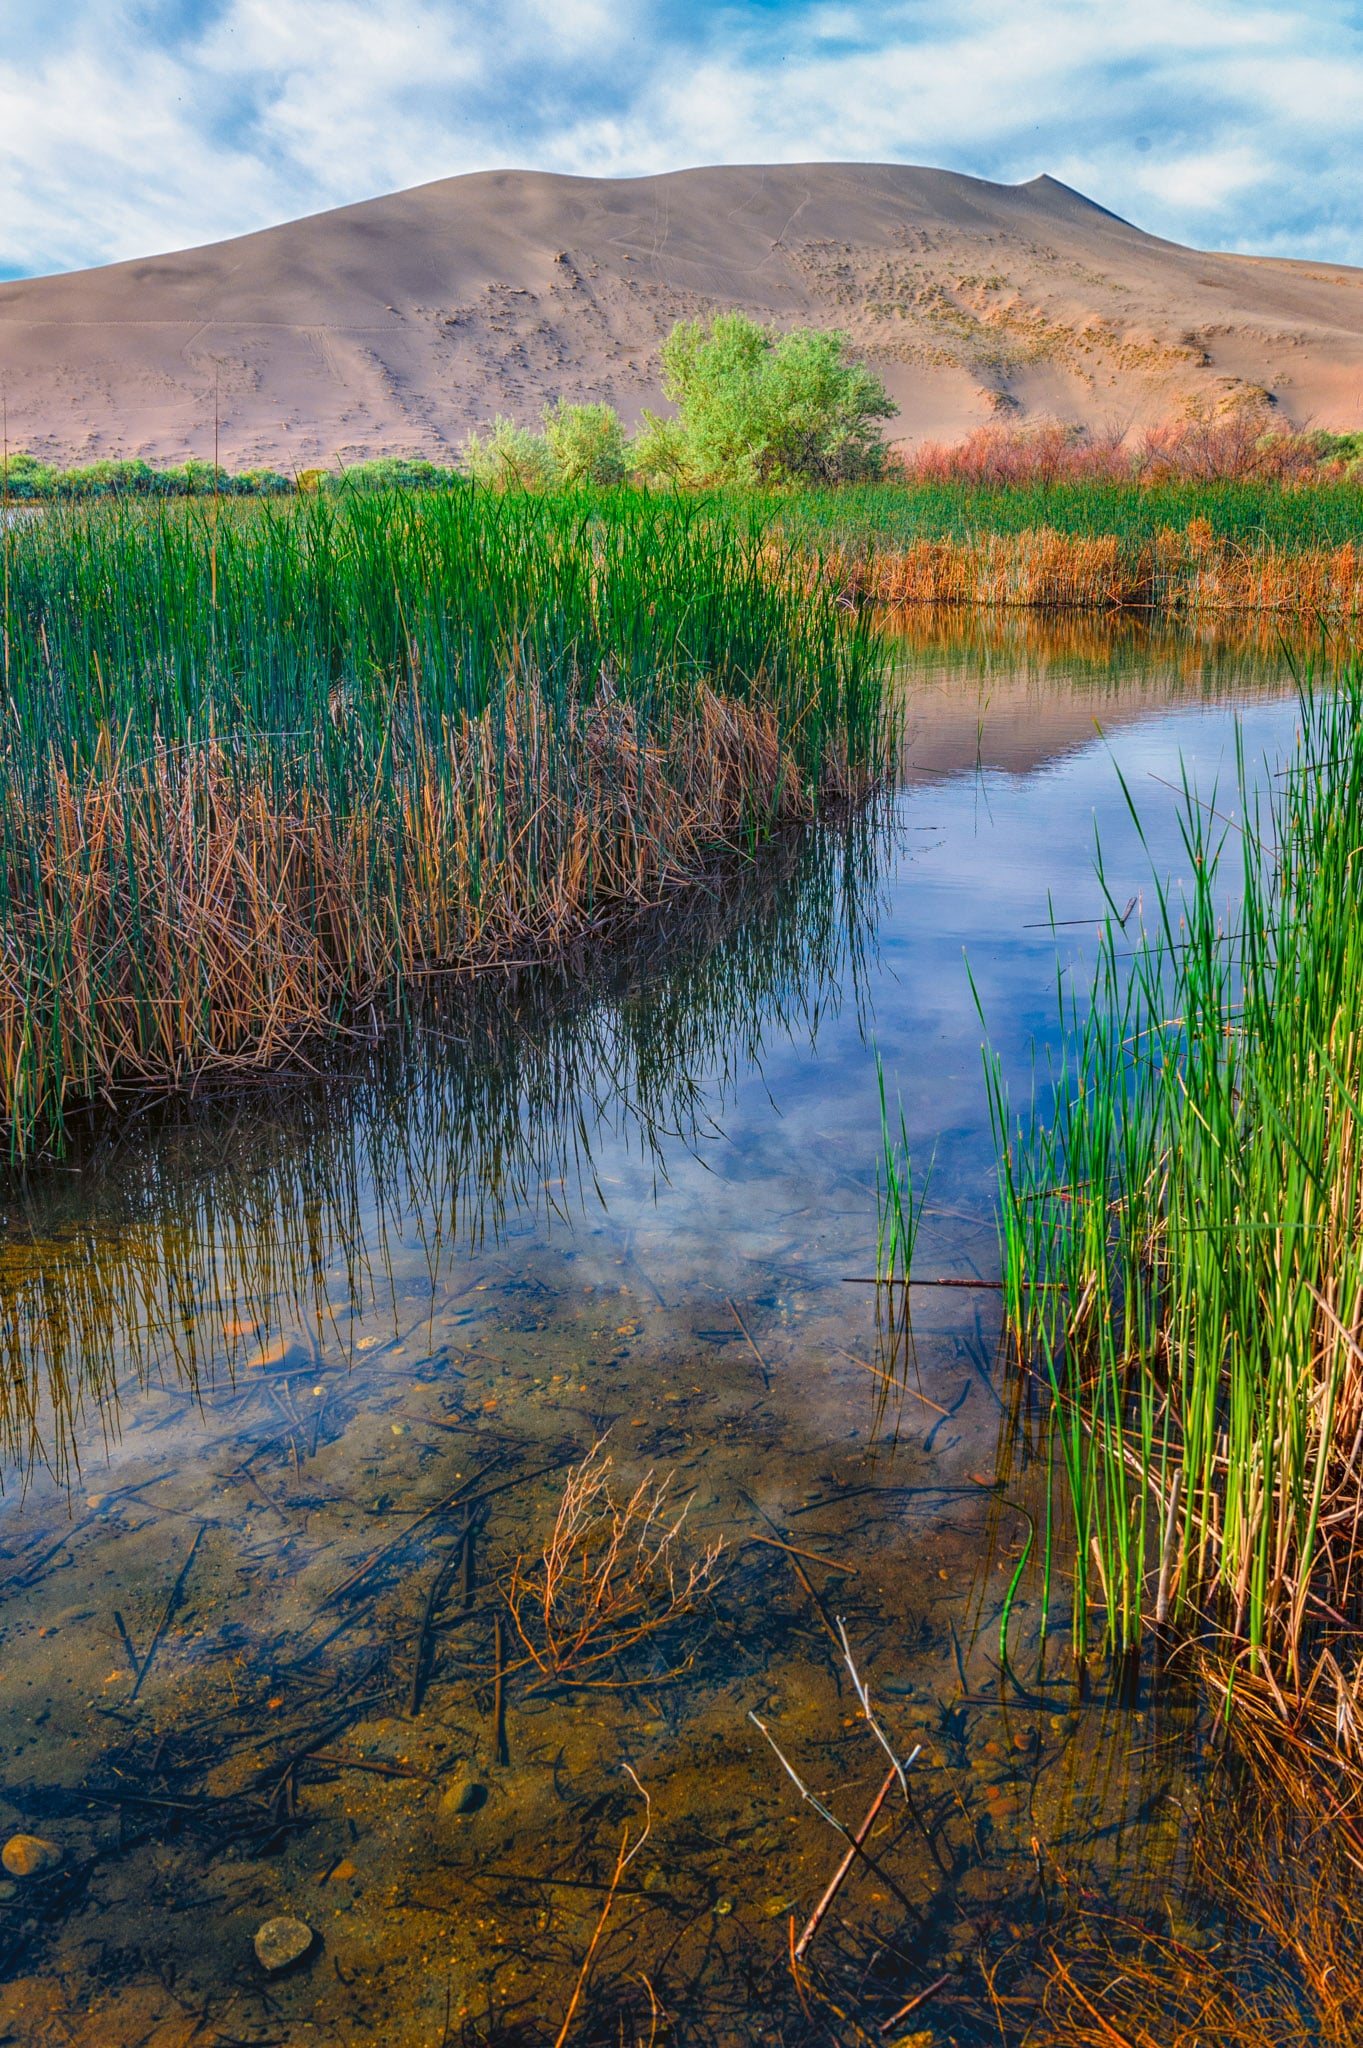 In a marshy area between Big Lake and Small Lake in Bruneau Dunes State Park, near Boise, Idaho.